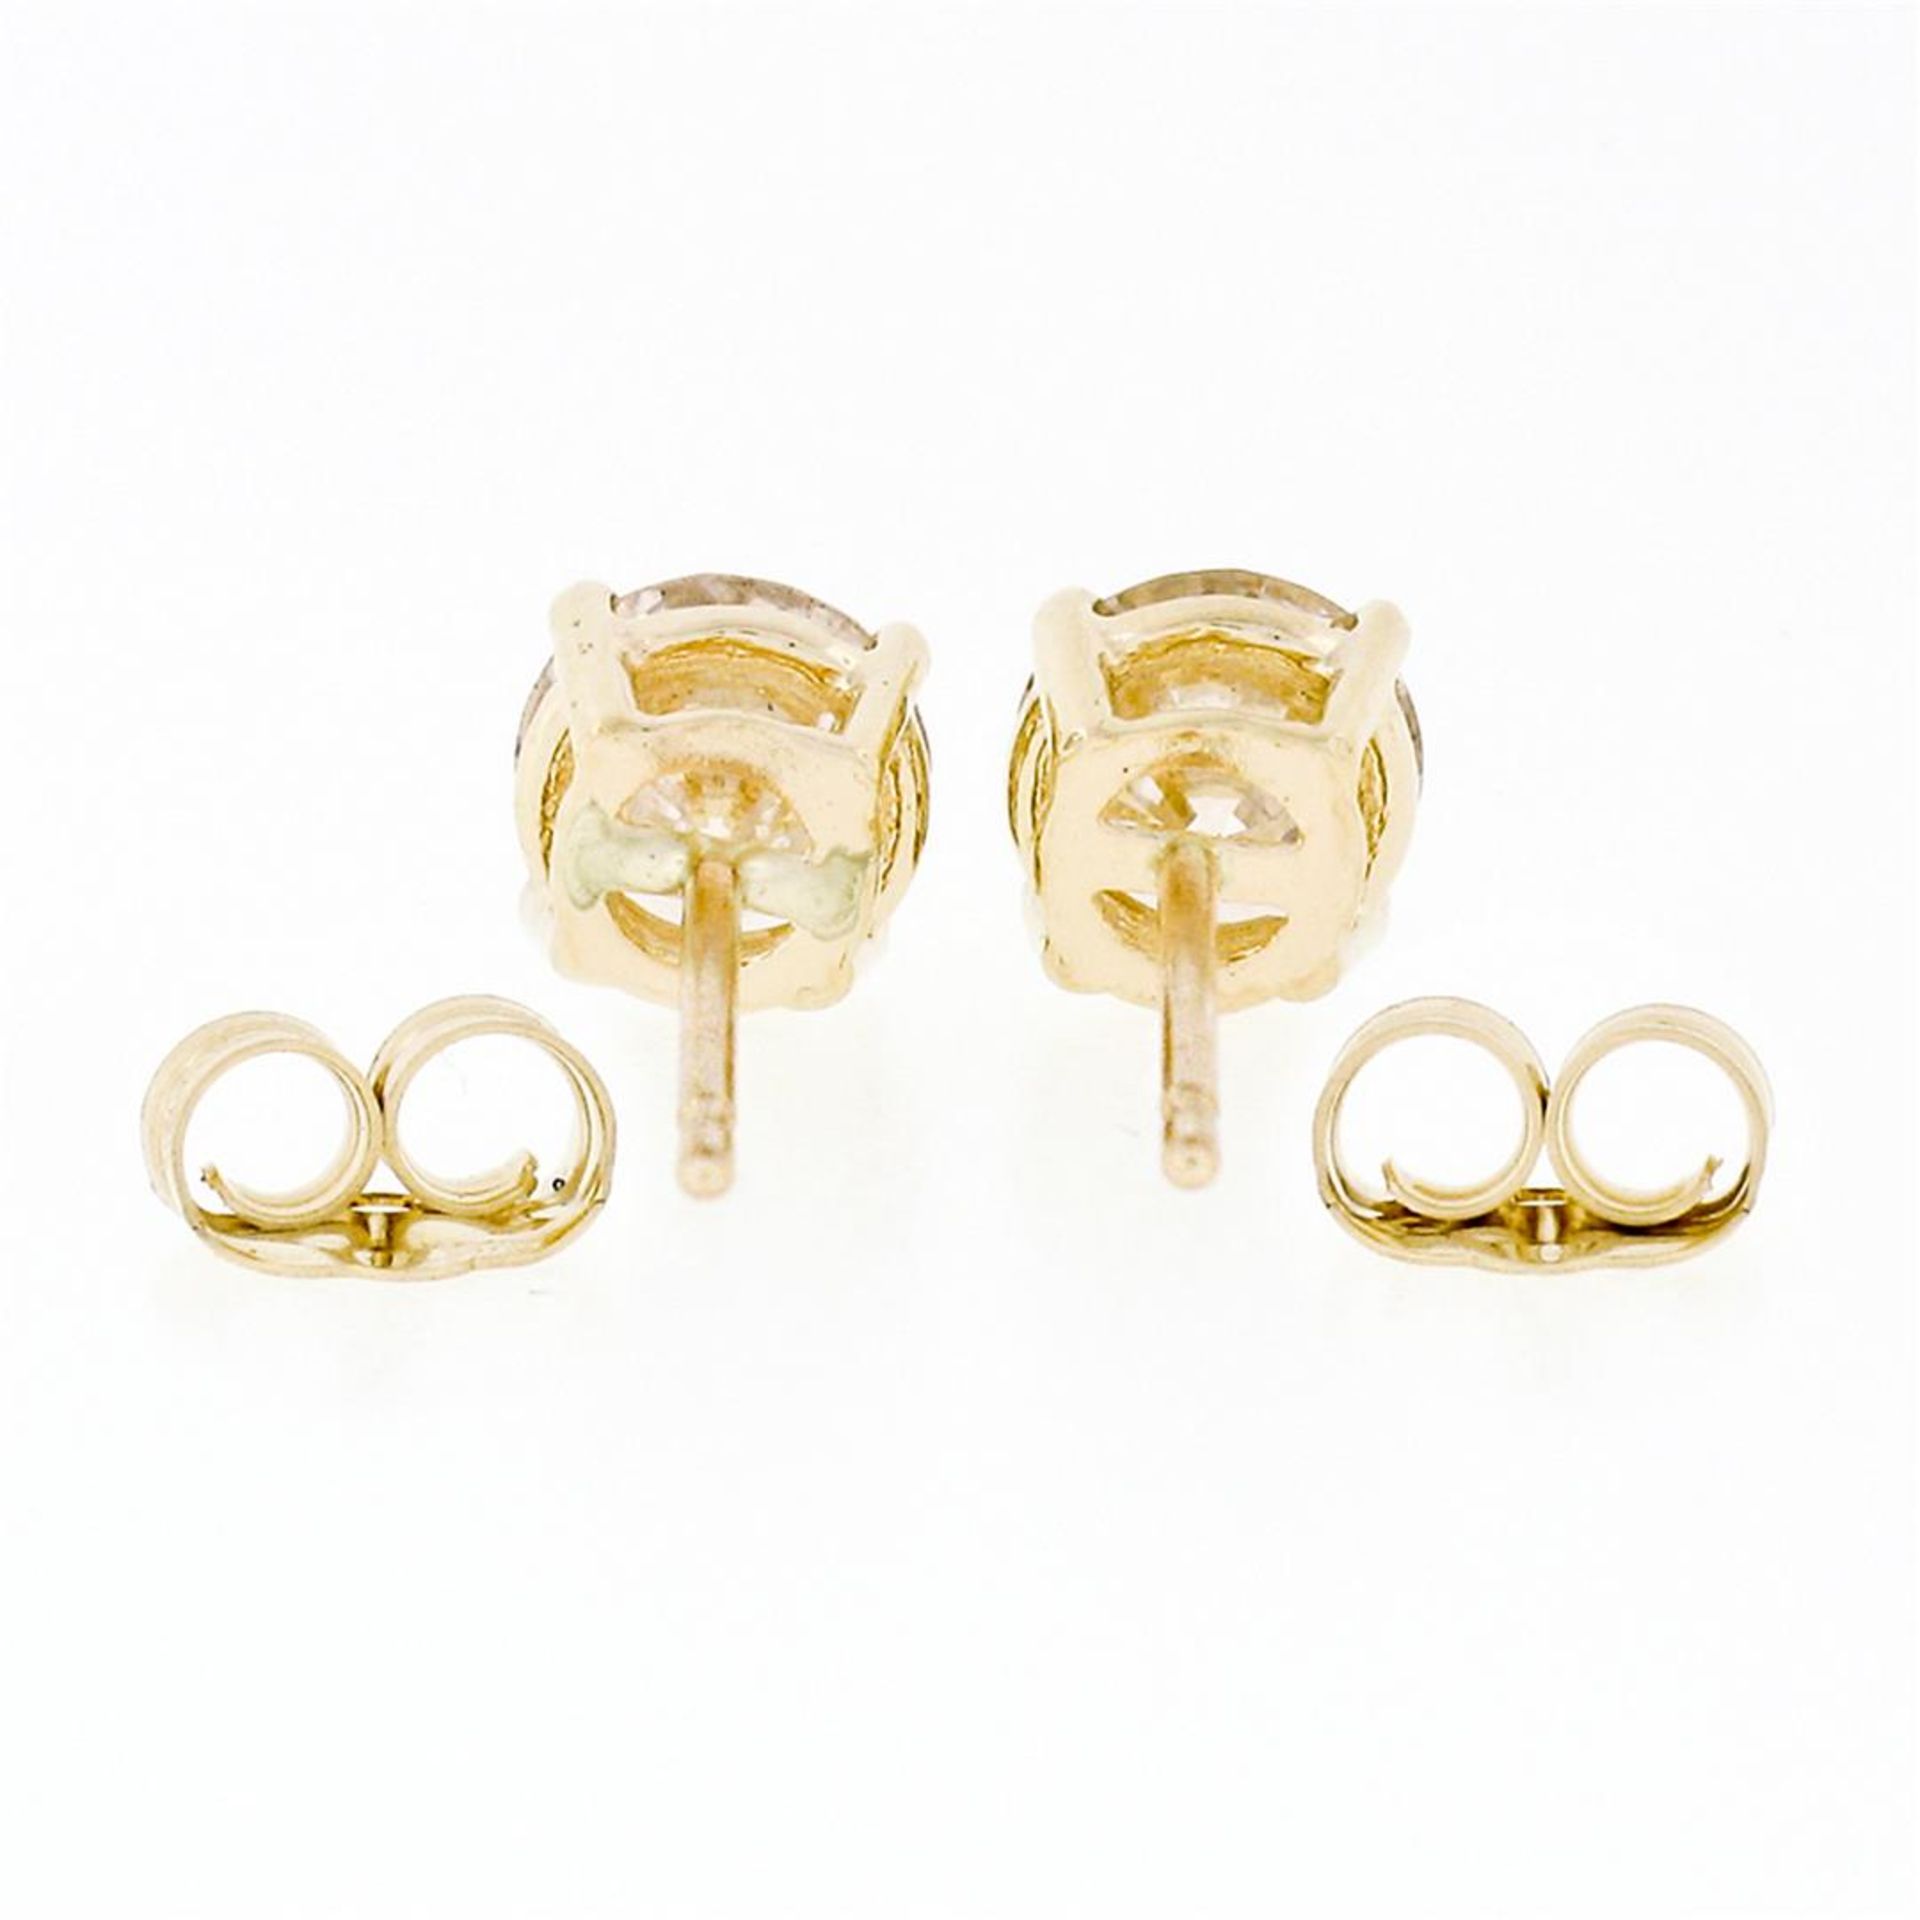 14k Yellow Gold 1.11ctw Round Brilliant Cut Diamond Claw Prong Stud Earrings - Image 5 of 6